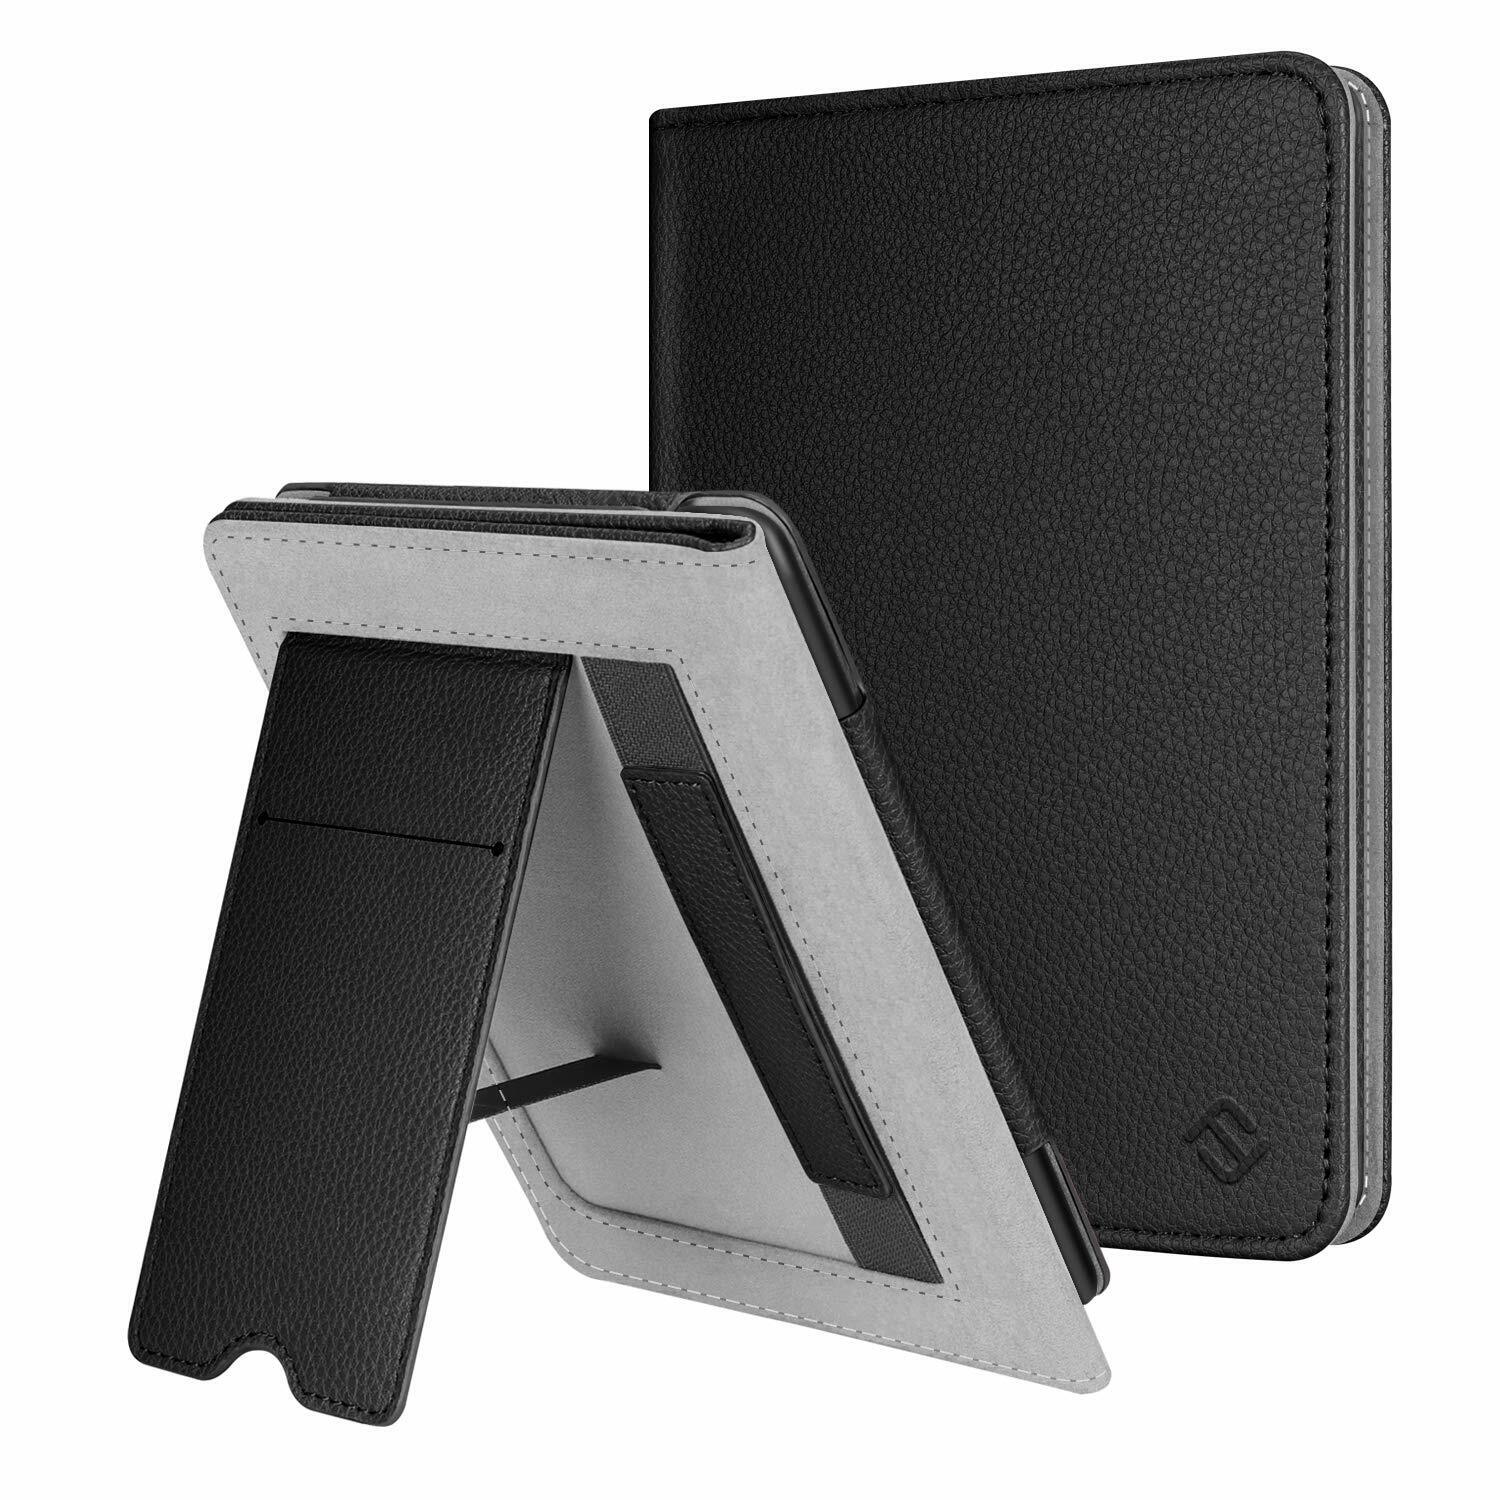 For Kindle Paperwhite 10th Generation 2018 Case Stand Sleeve Cover w/ Hand Strap